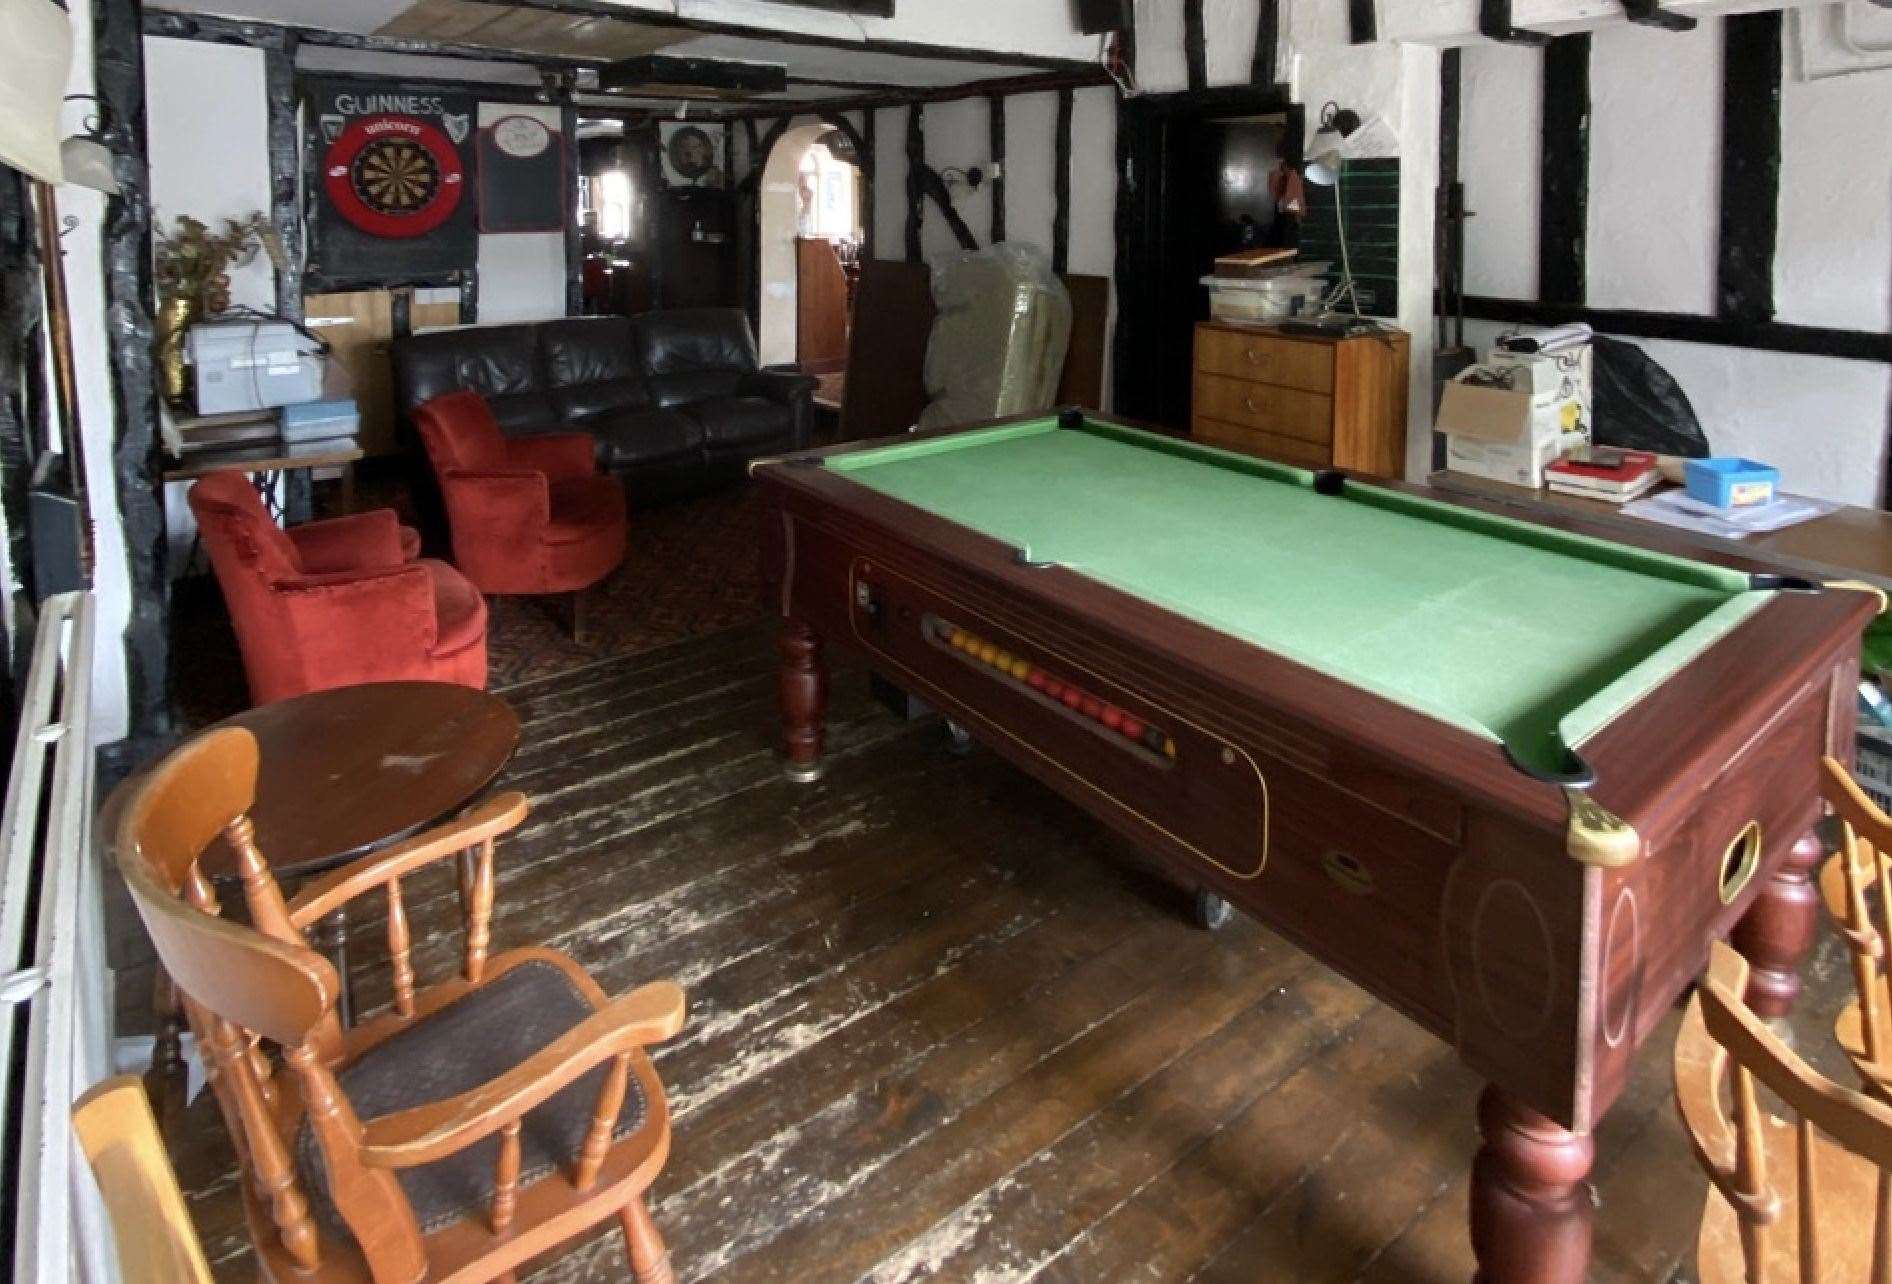 The games room at the back of the pub will form part of the private living space